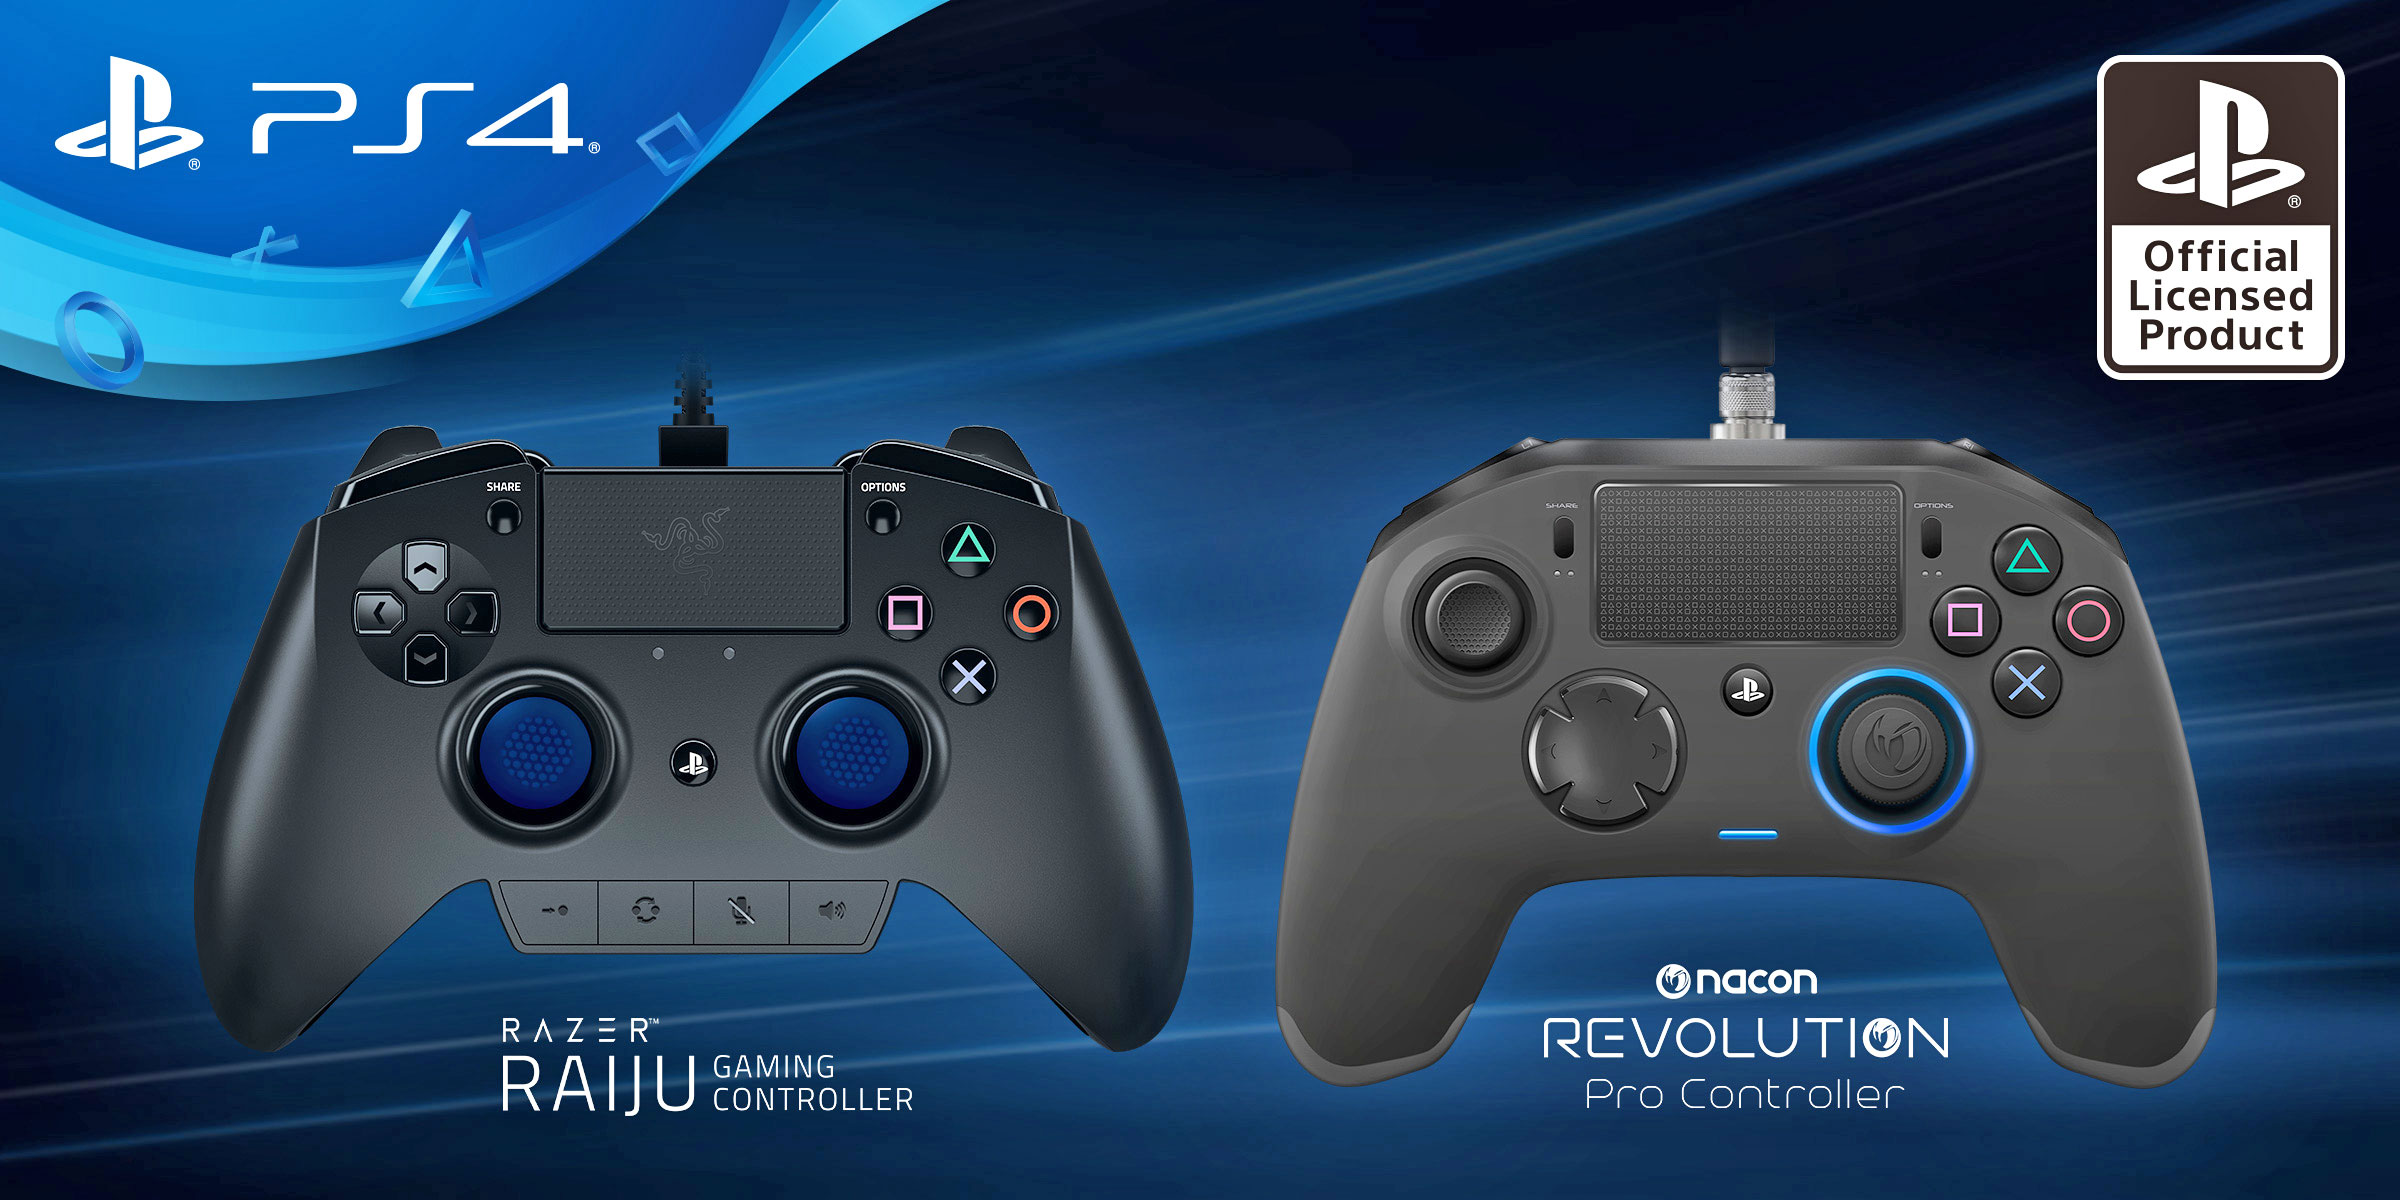 4 has a pair of controllers made for gamers Engadget